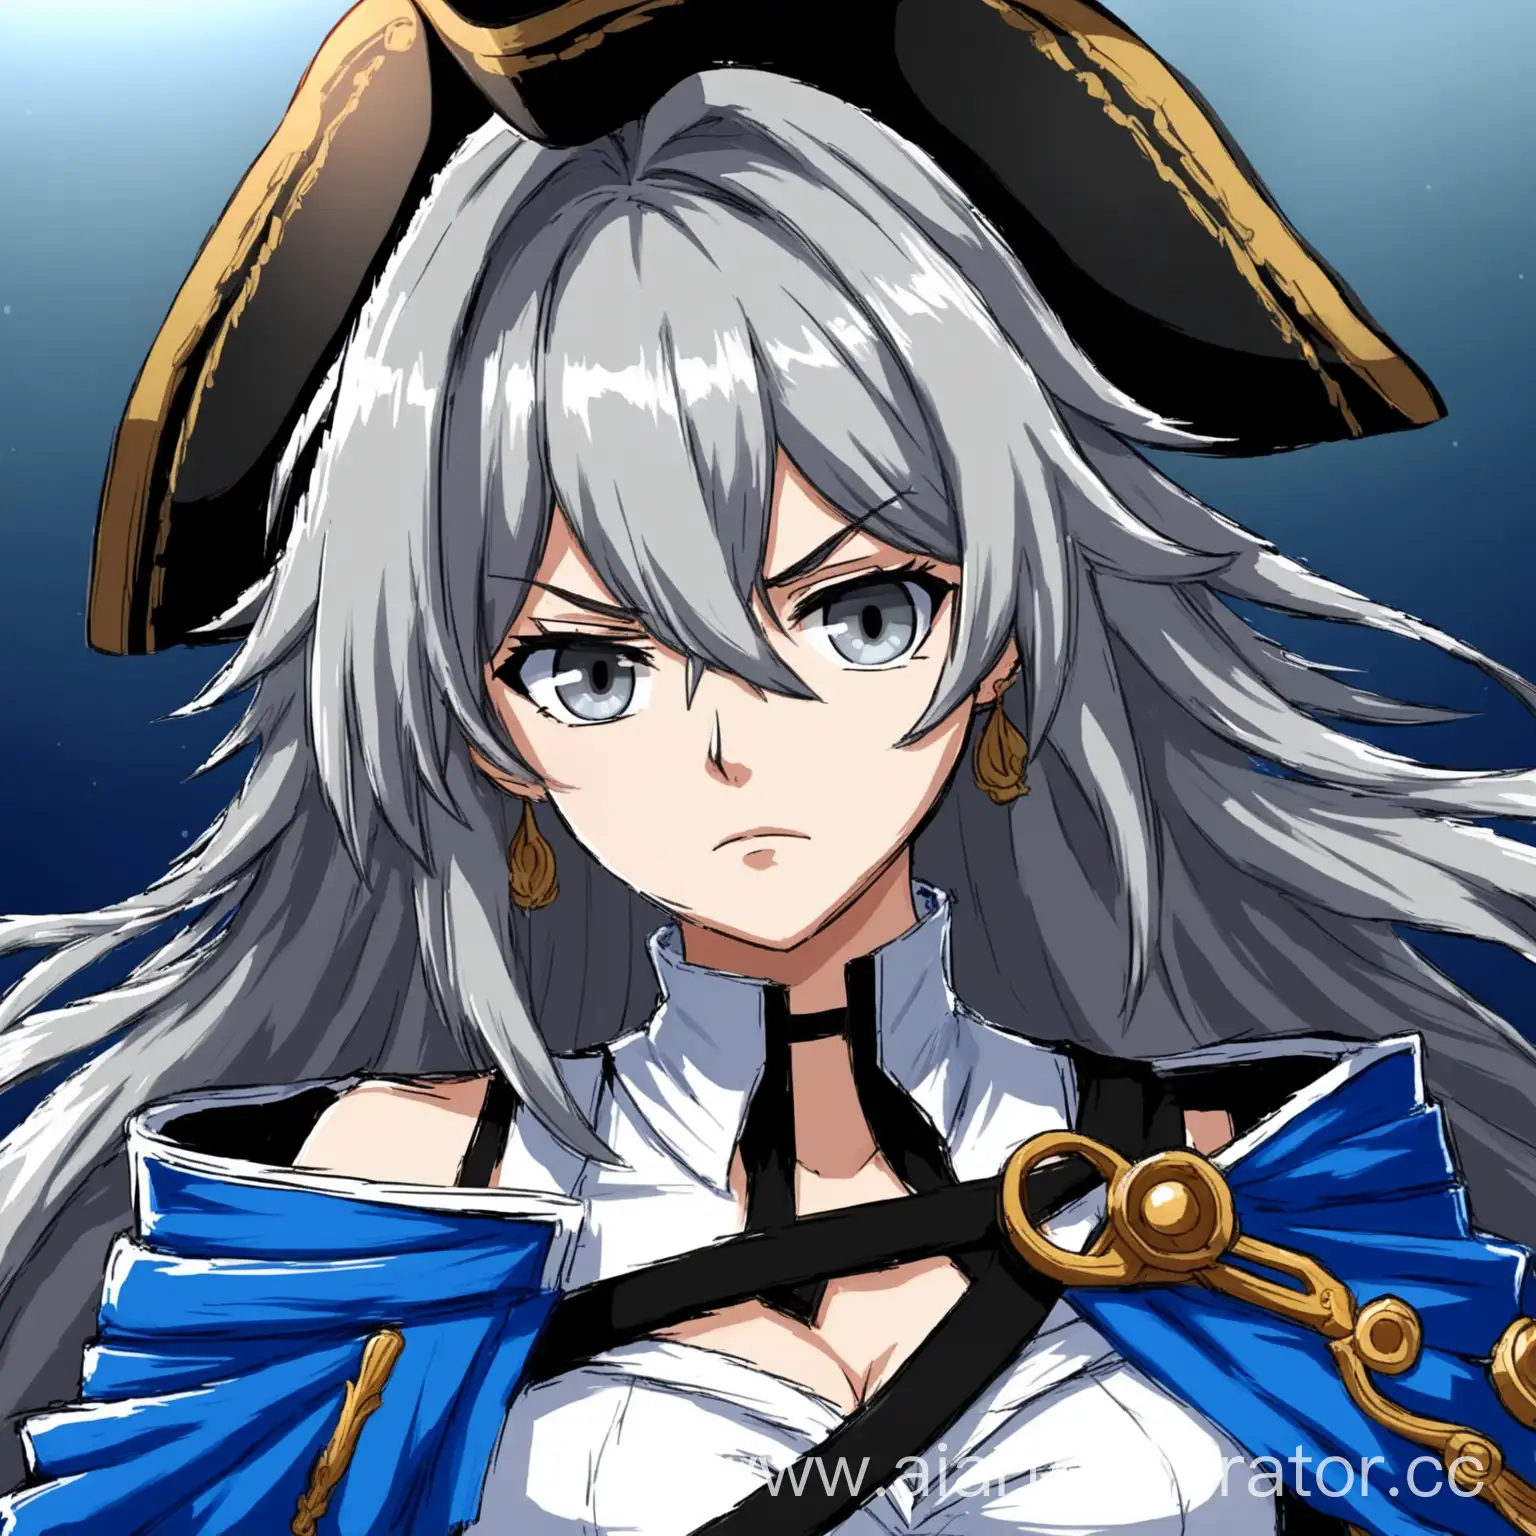 Bronya-Queen-of-Pirates-Anime-Woman-in-Gray-Hair-and-Pirate-Costume